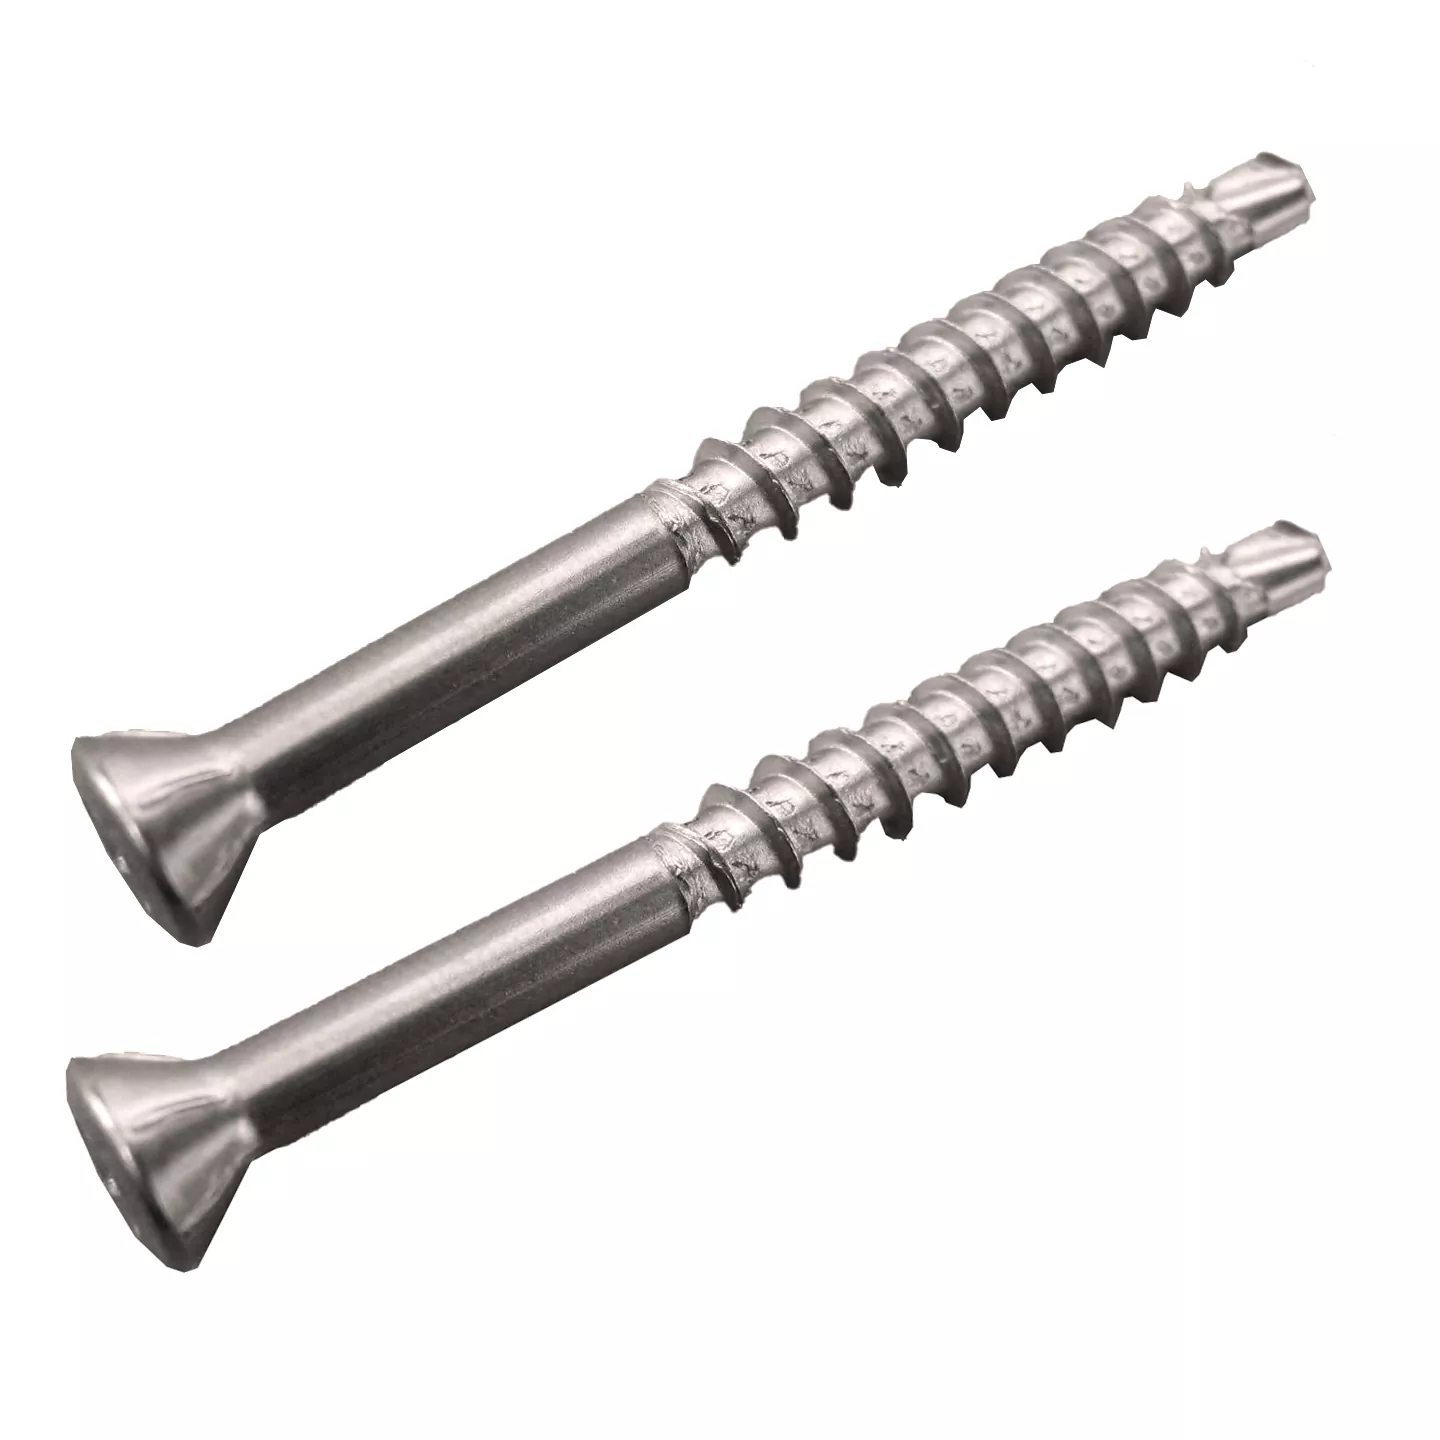 Do you need to pre drill self drilling screws?